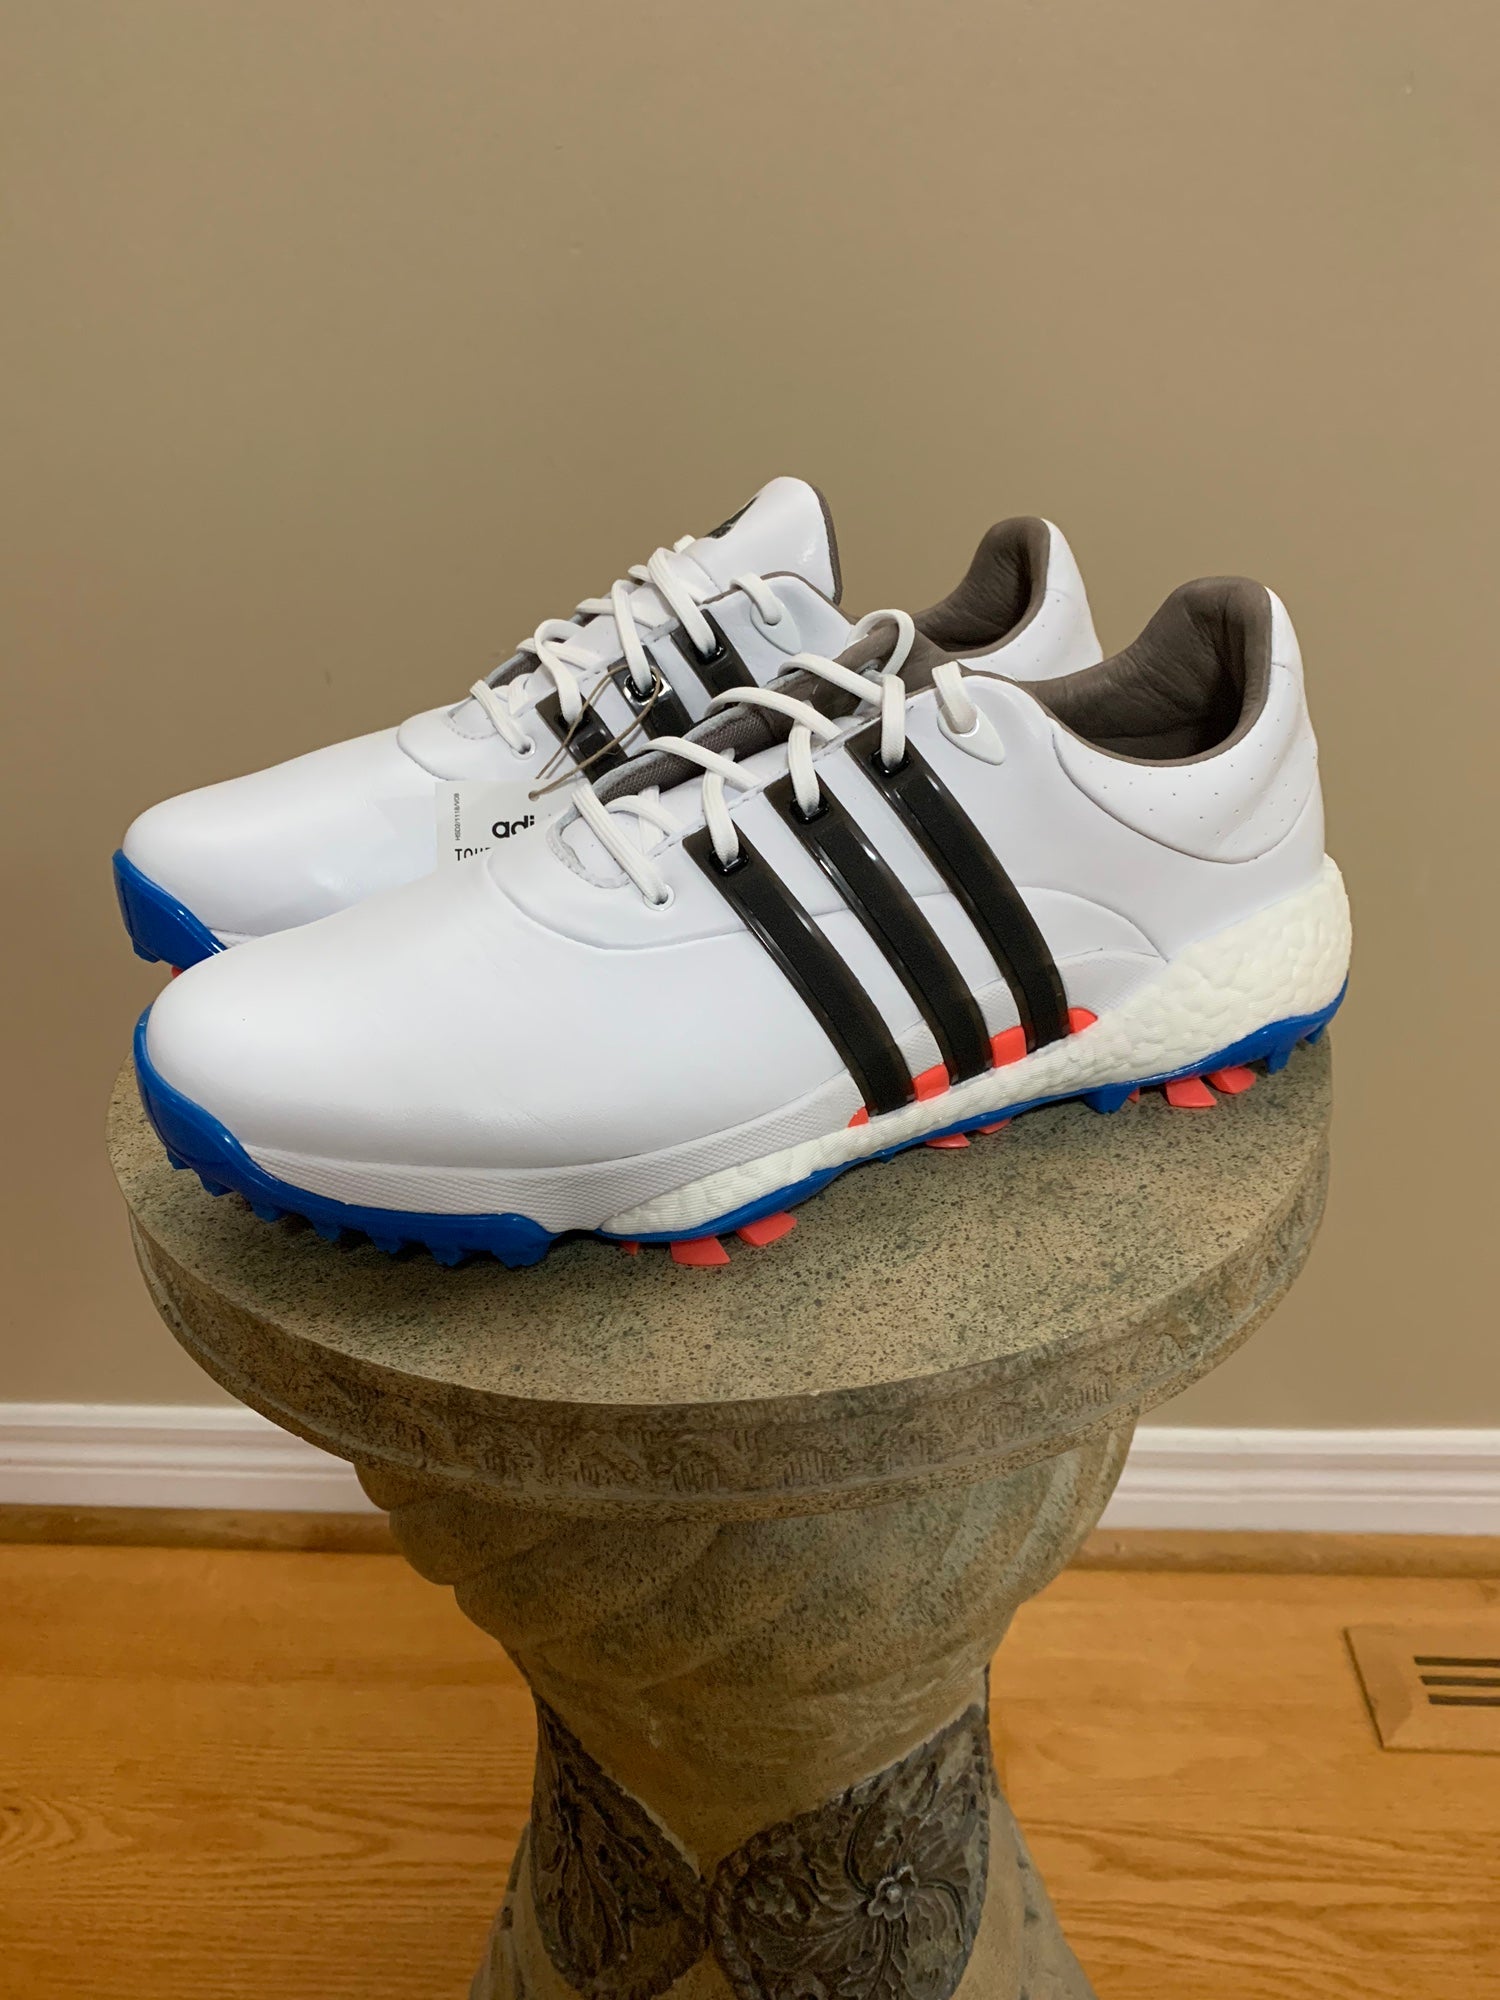 Adidas Tour 360 Boost Golf Shoes M11 SidelineSwap